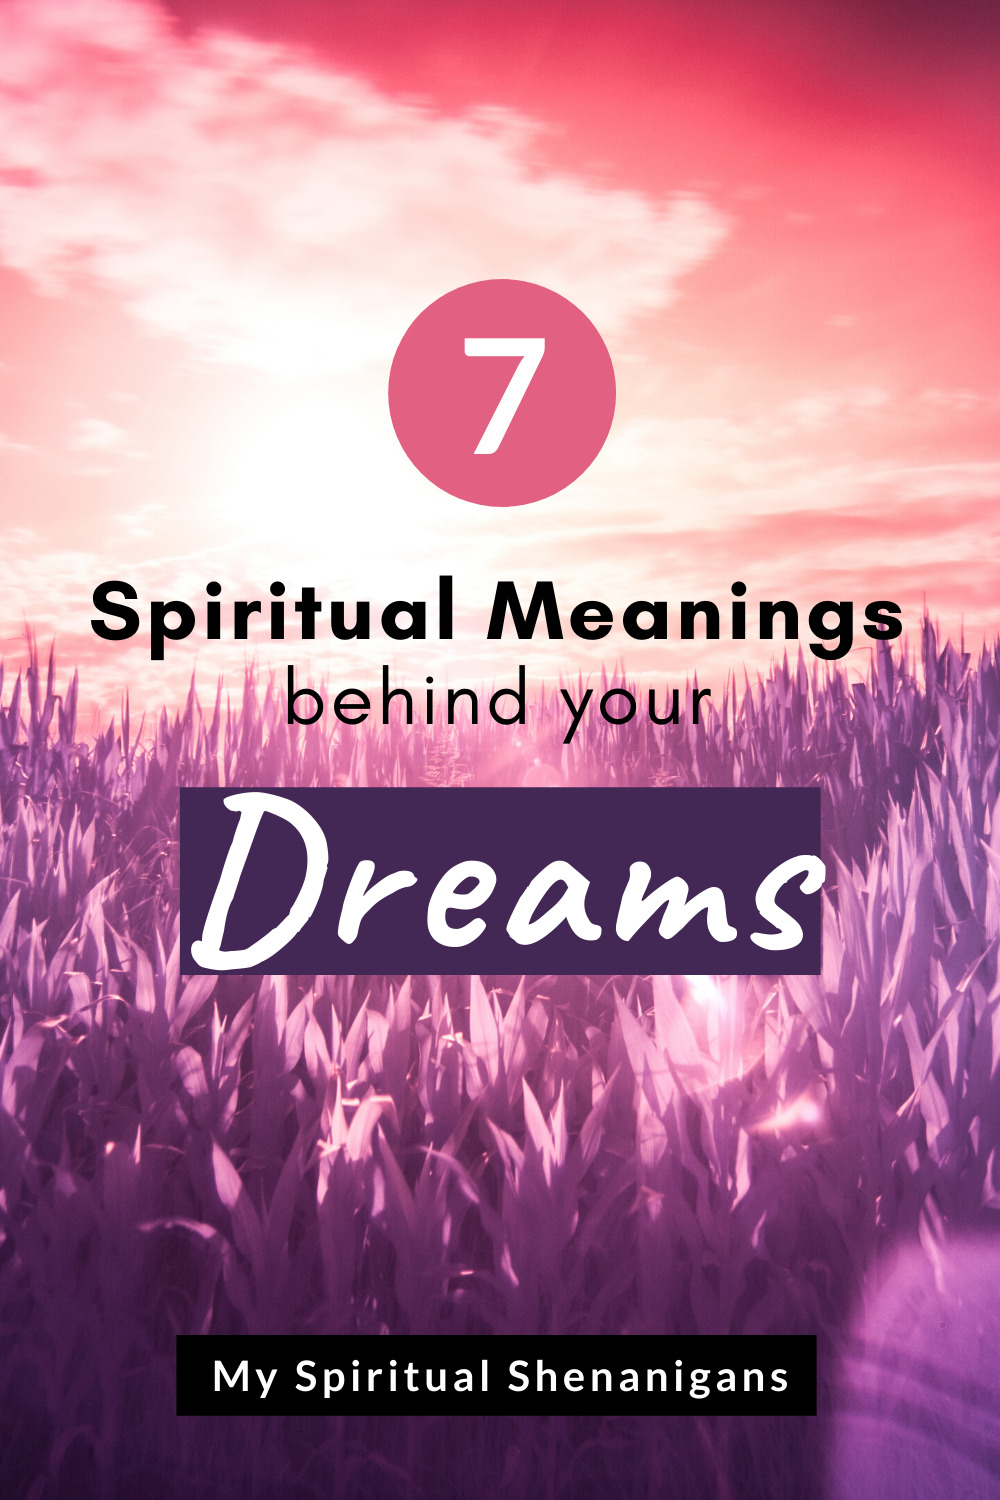 Dreams Meaning And Spiritual Meaning Of Pink